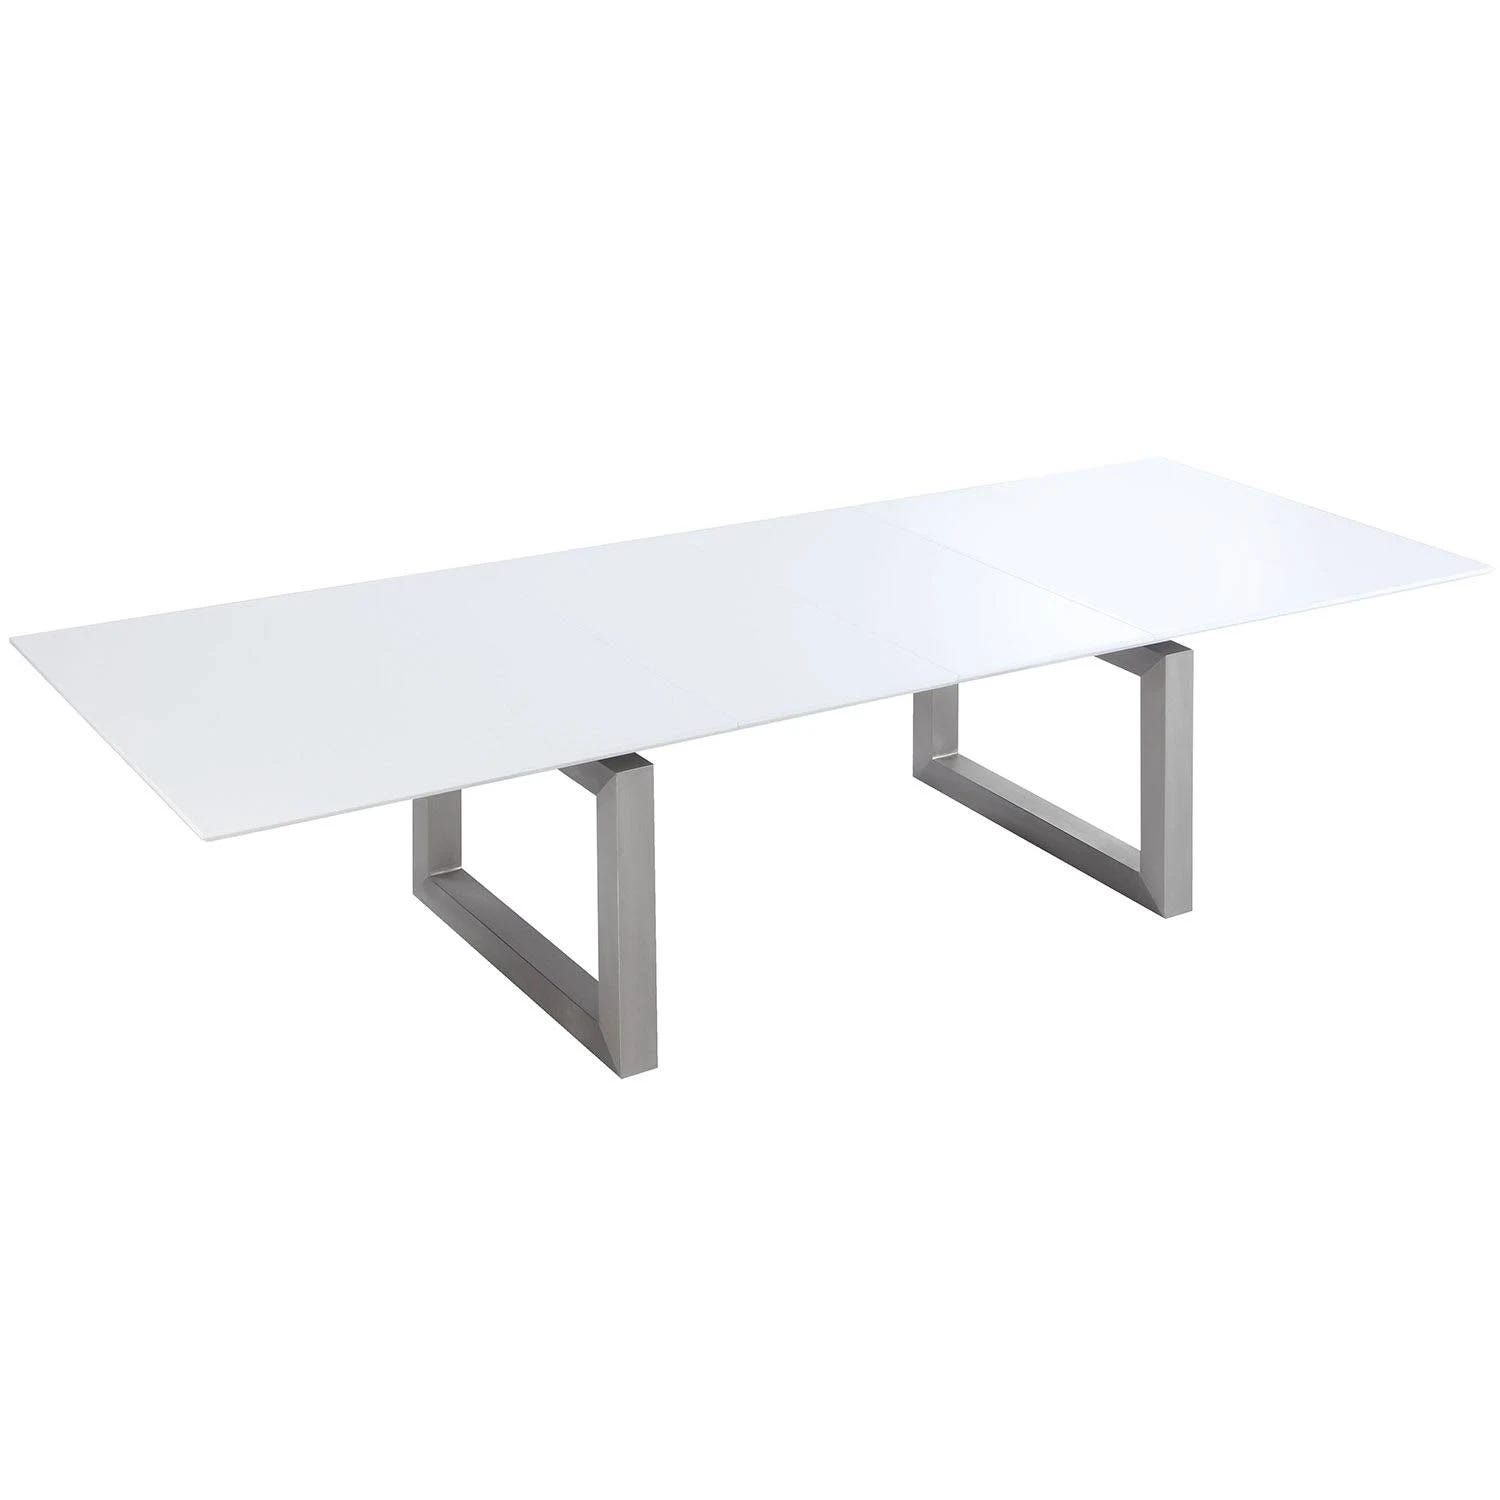 Chintaly Imports Chic Dining Table in White | Image